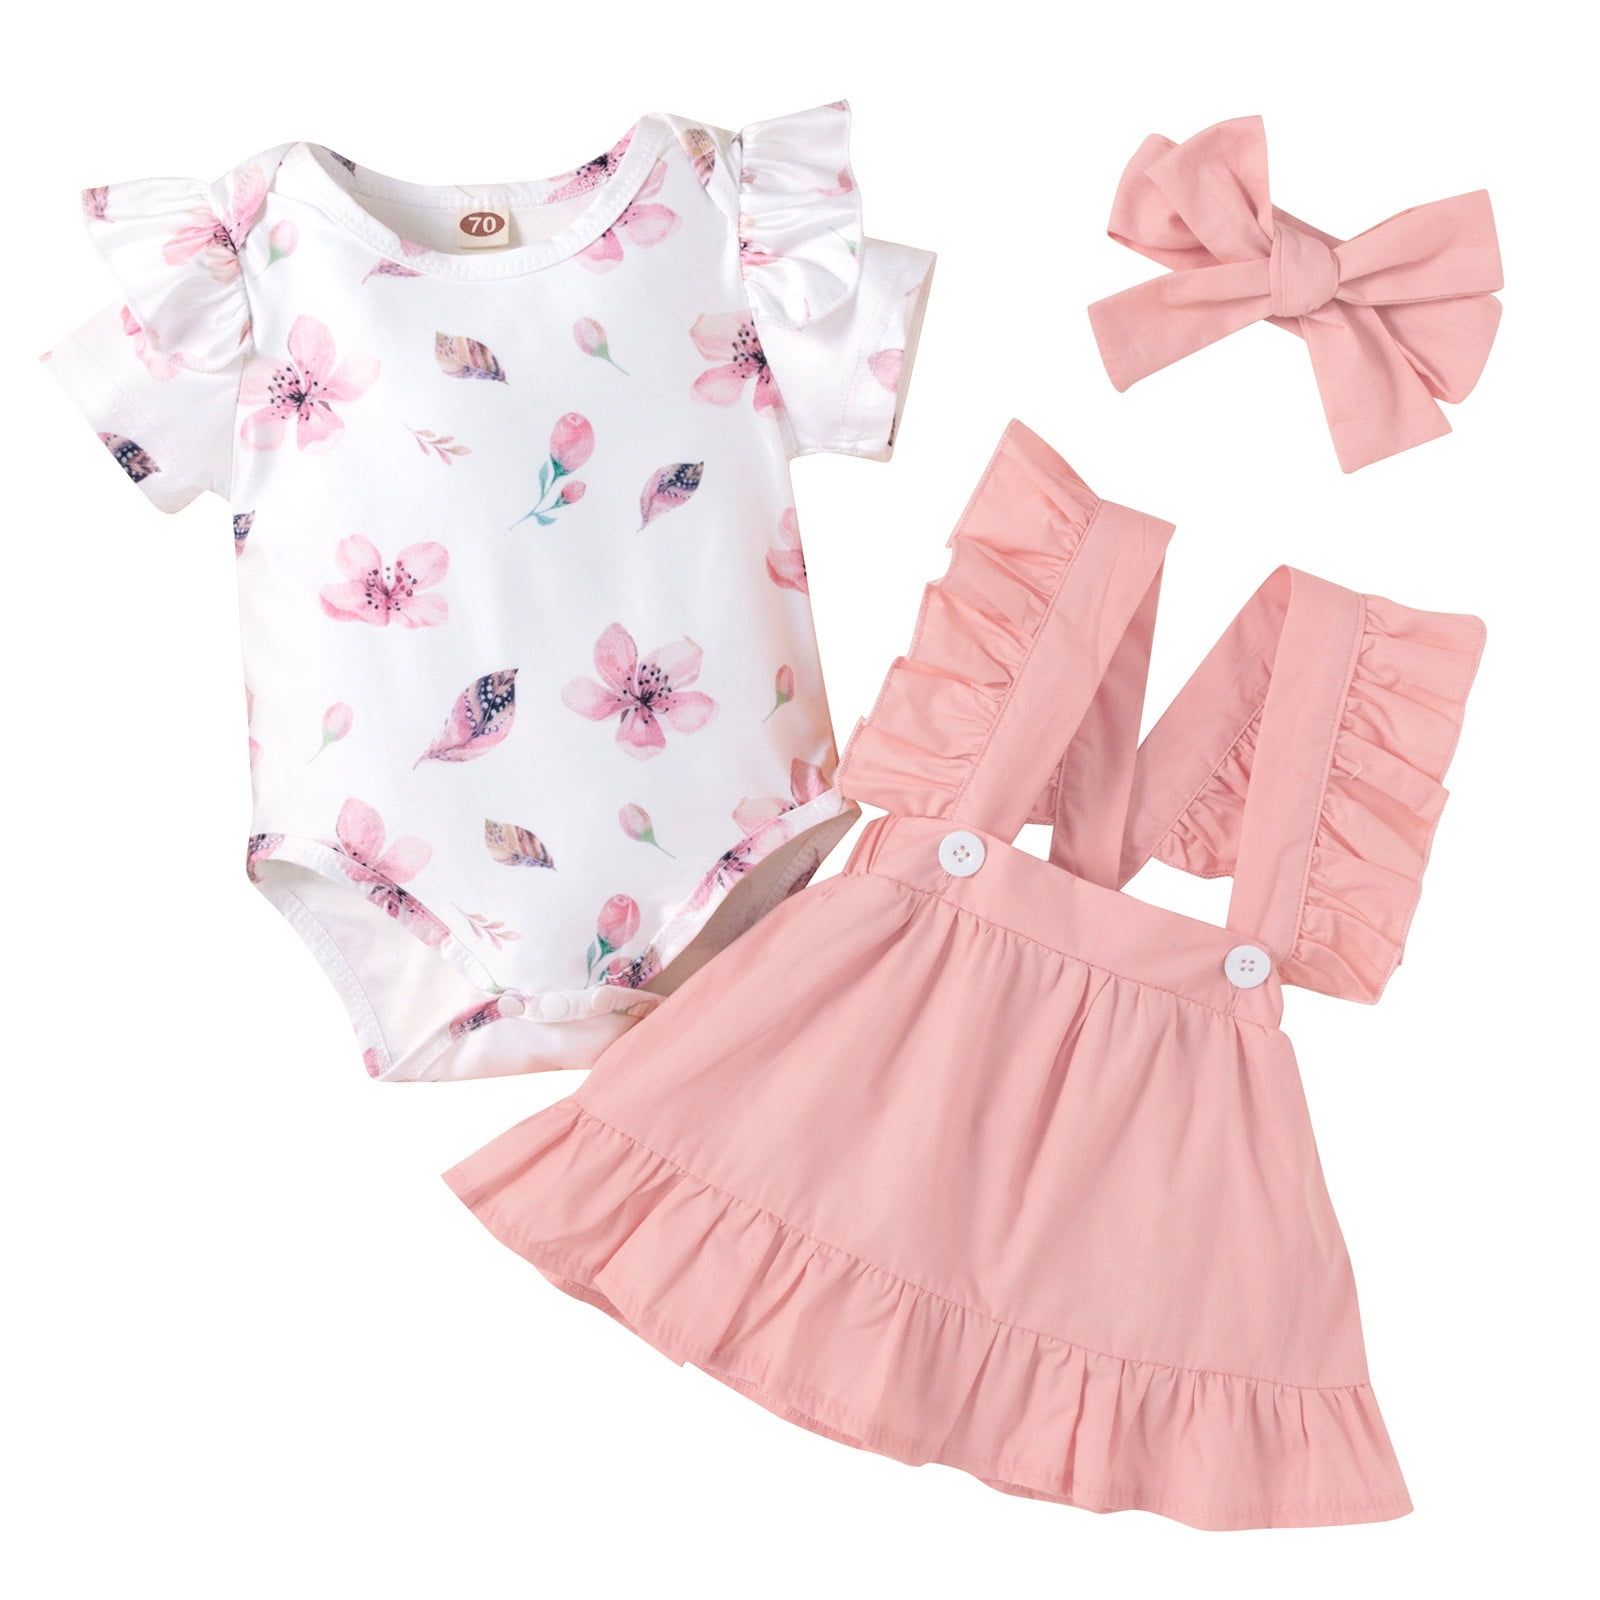 Toddler Baby Kid Girls Dress Ruffle Sleeve Shirt Romper Suspender Skirt Baby Girls Clothes Outfits Sets 